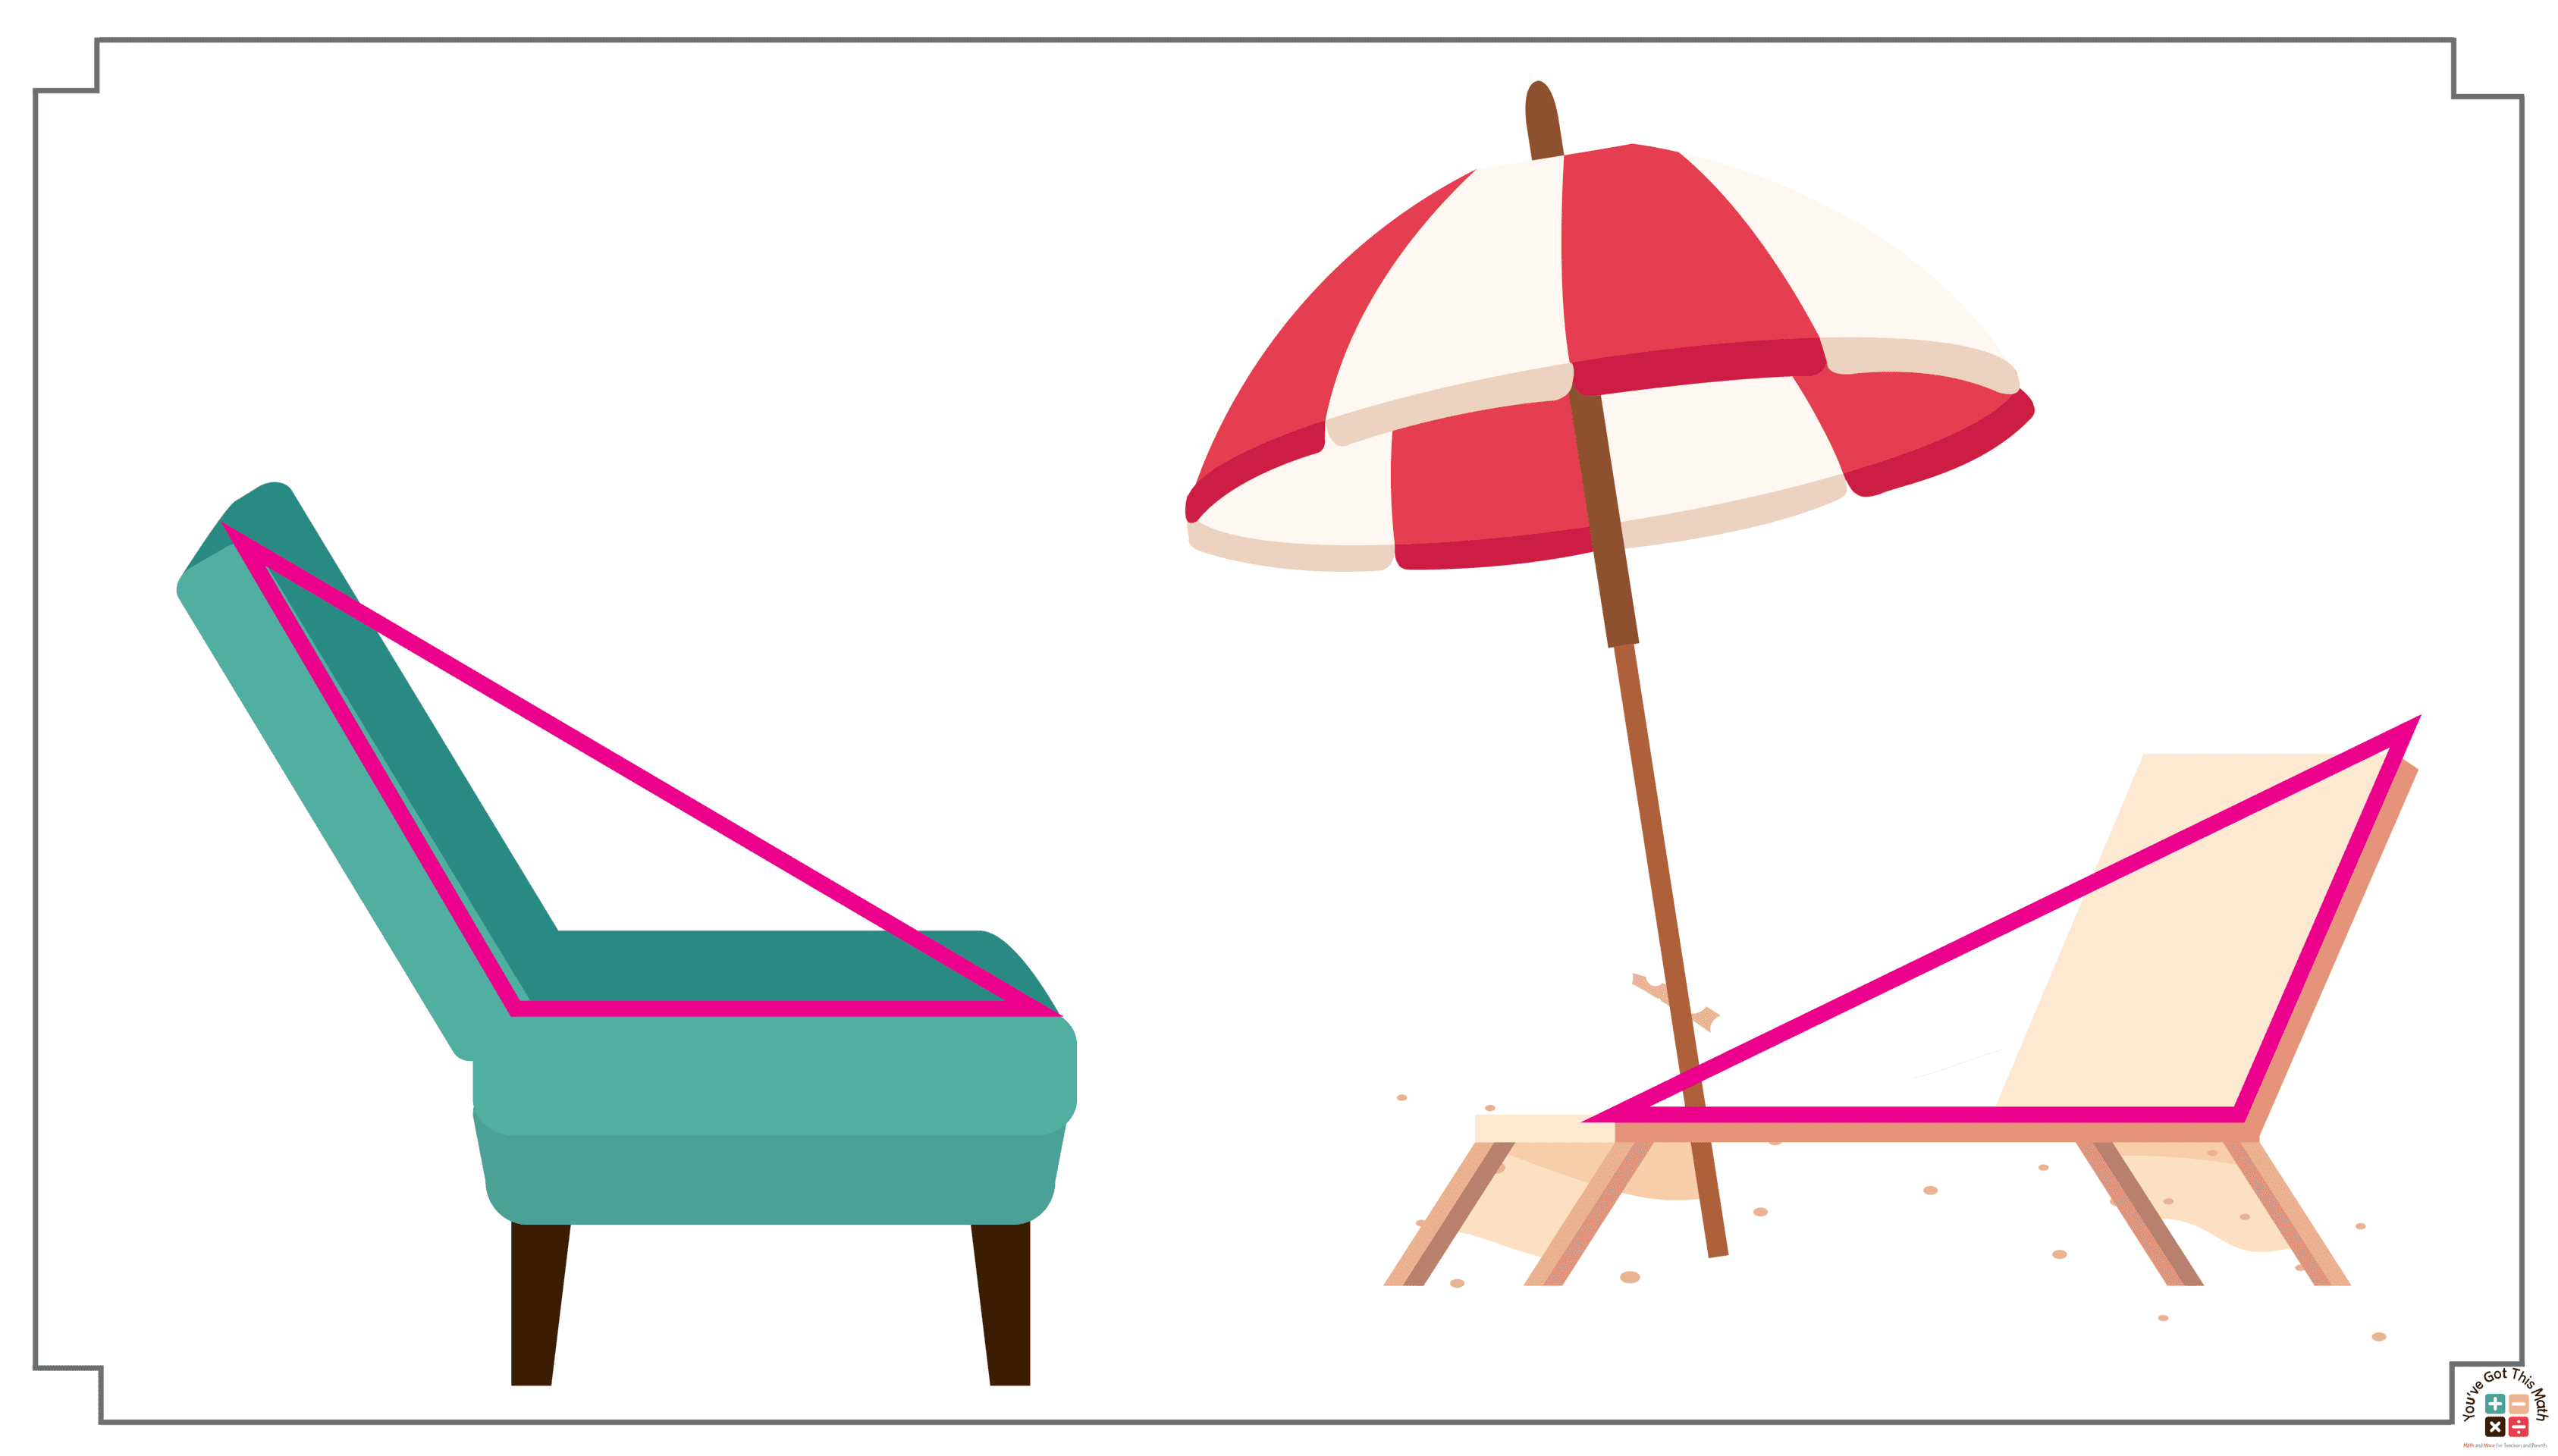 Recliners and Deck Chairs as Obtuse Triangle